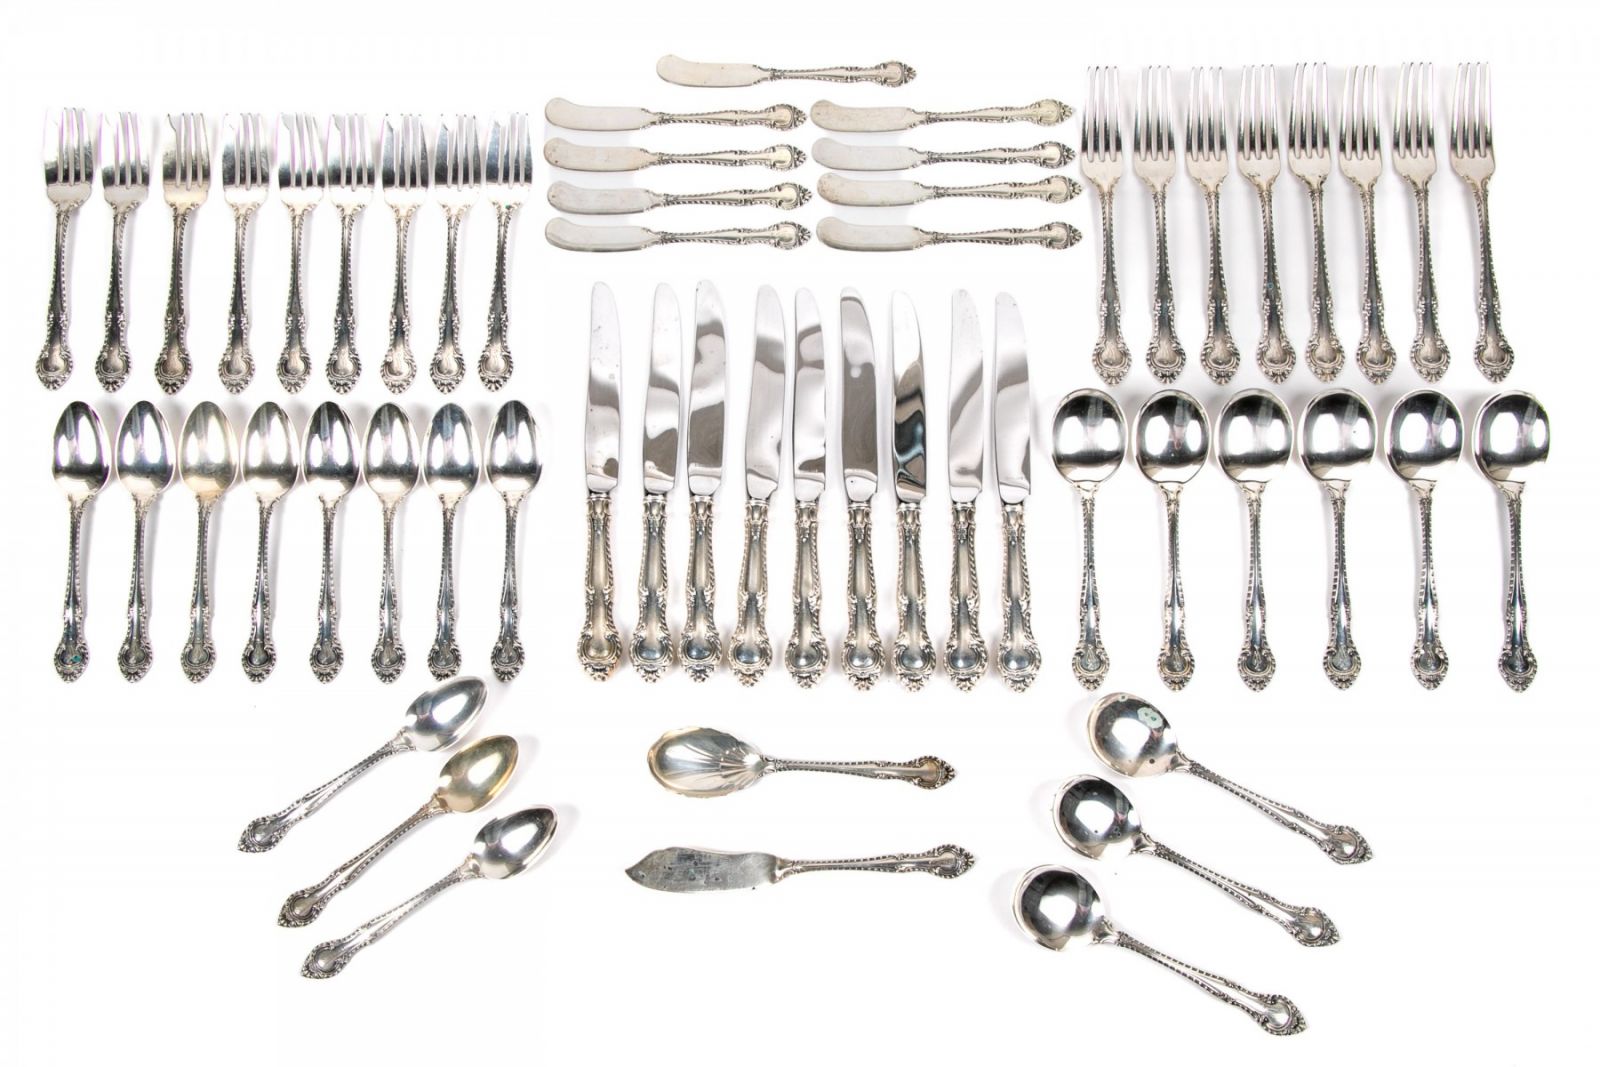 PARTIAL SET OF GORHAM STERLING SILVER FLATWARE ENGLISH GADROON PATTERN 54.245 WEIGHABLE TROY OZS.